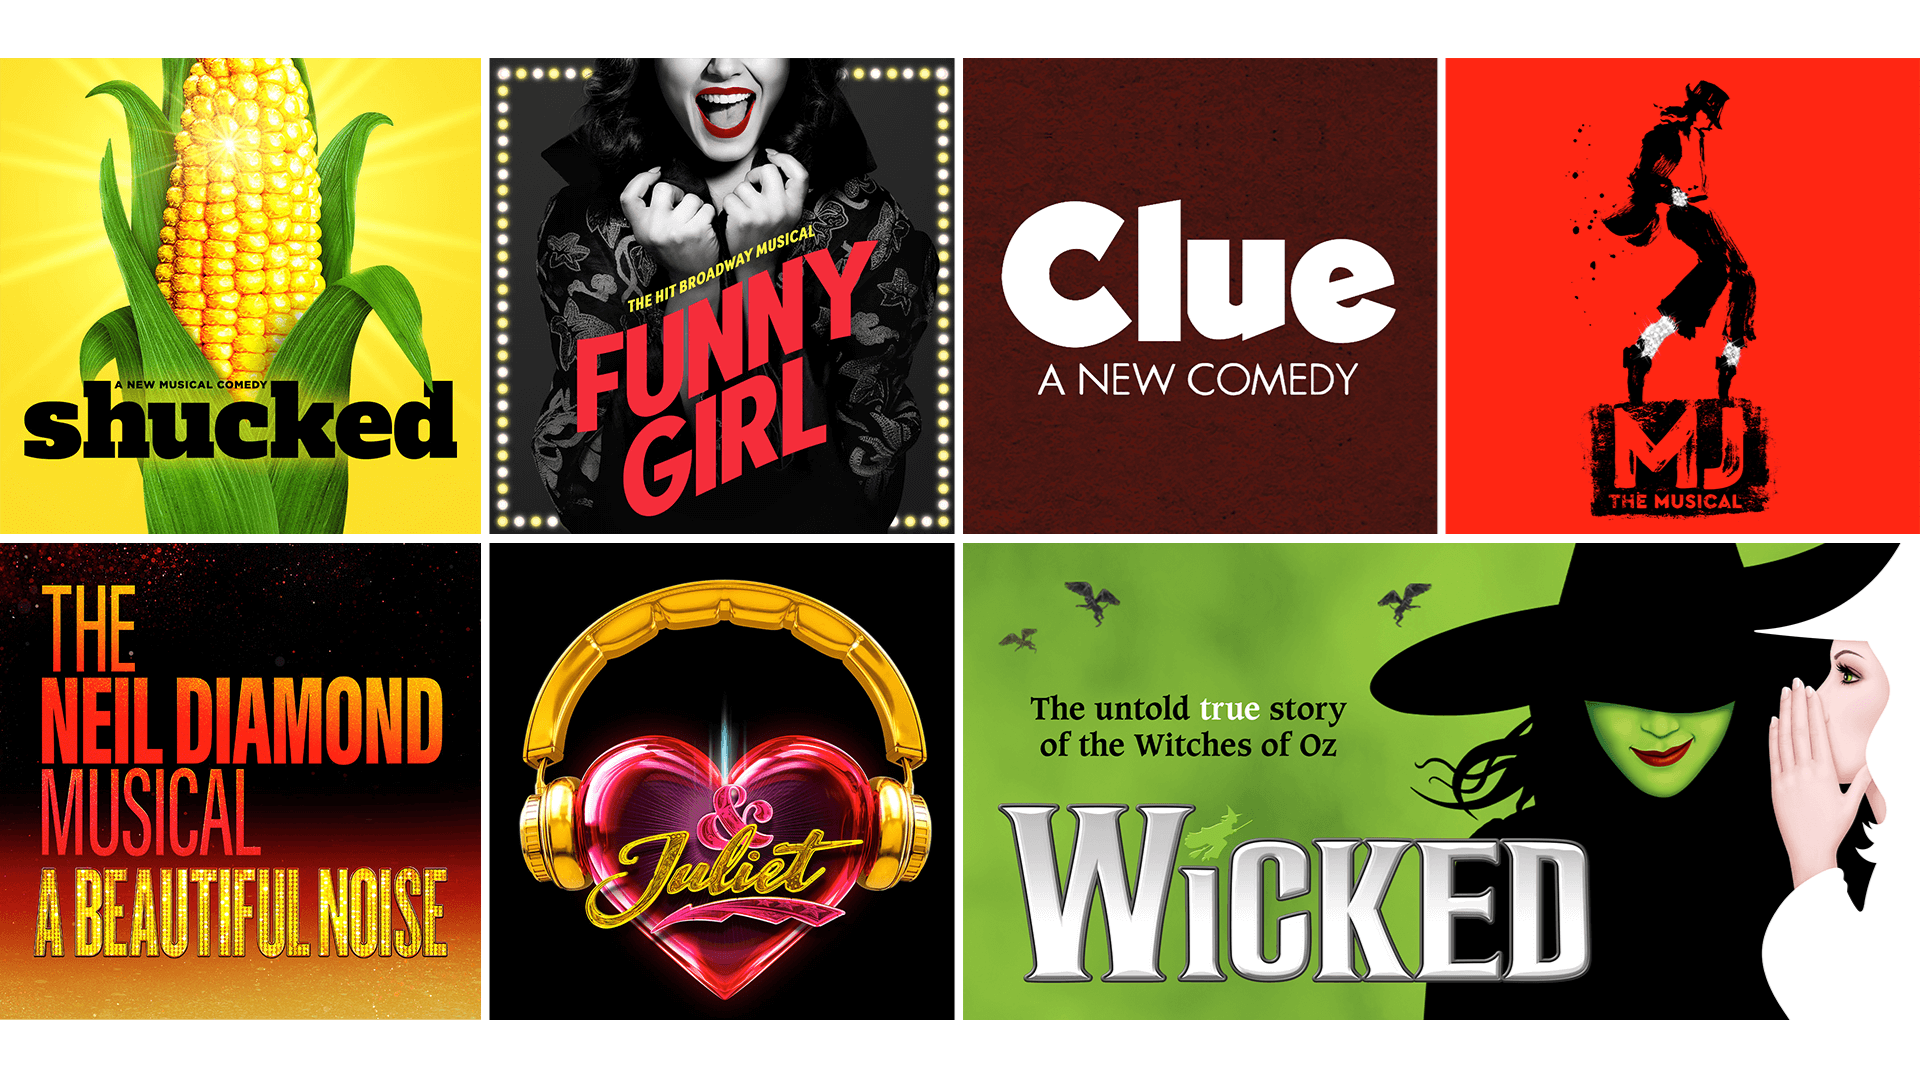 Banner collage of seven Broadway posters: "Shucked," "Funny Girl," "Clue," "MJ the Musical," "And Juliet," "The Neil Diamond Musical: A Beautiful Noise" and "Wicked."